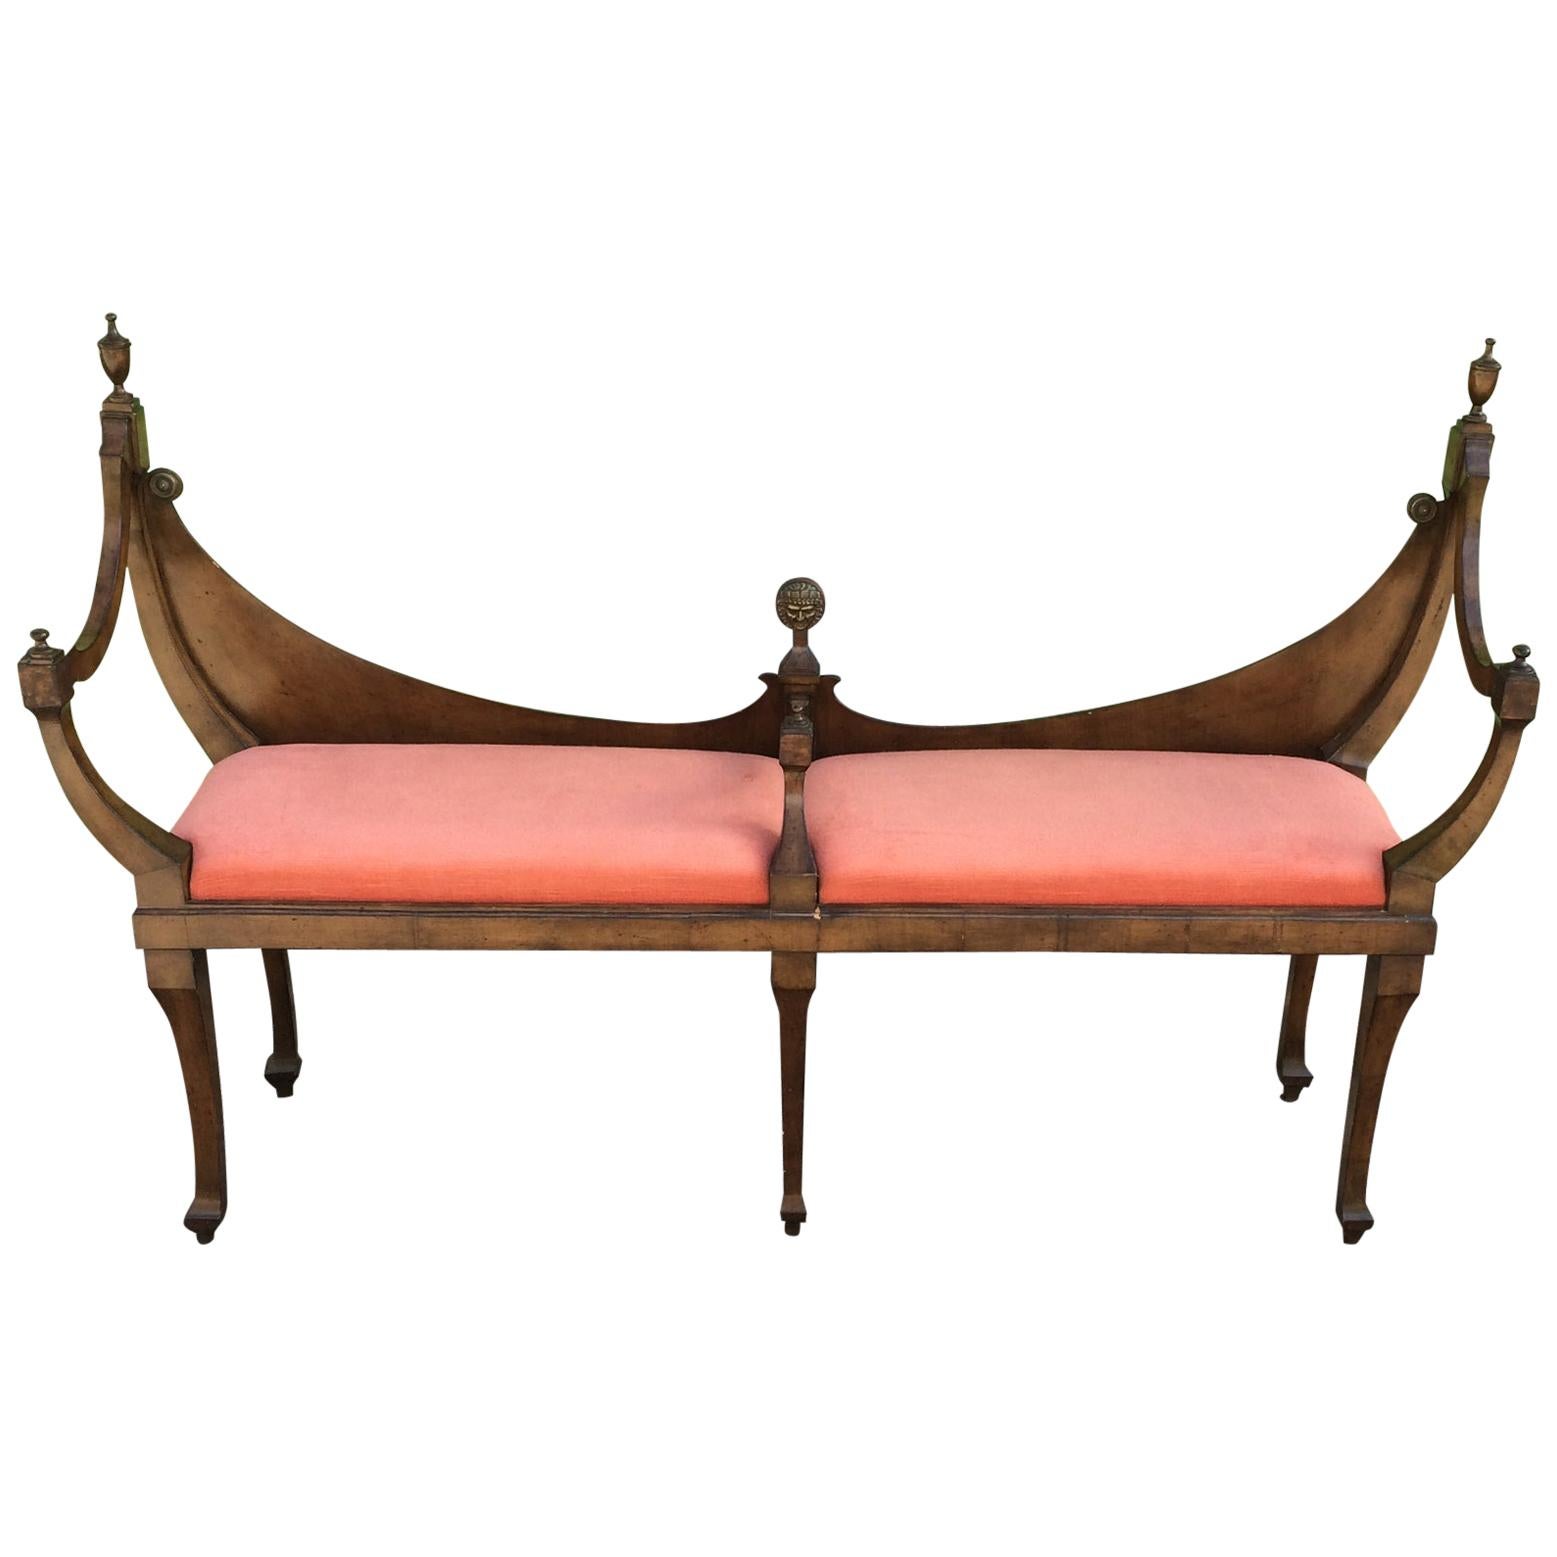 Neoclassical Style Fruitwood Bench with Cast Bronze Face